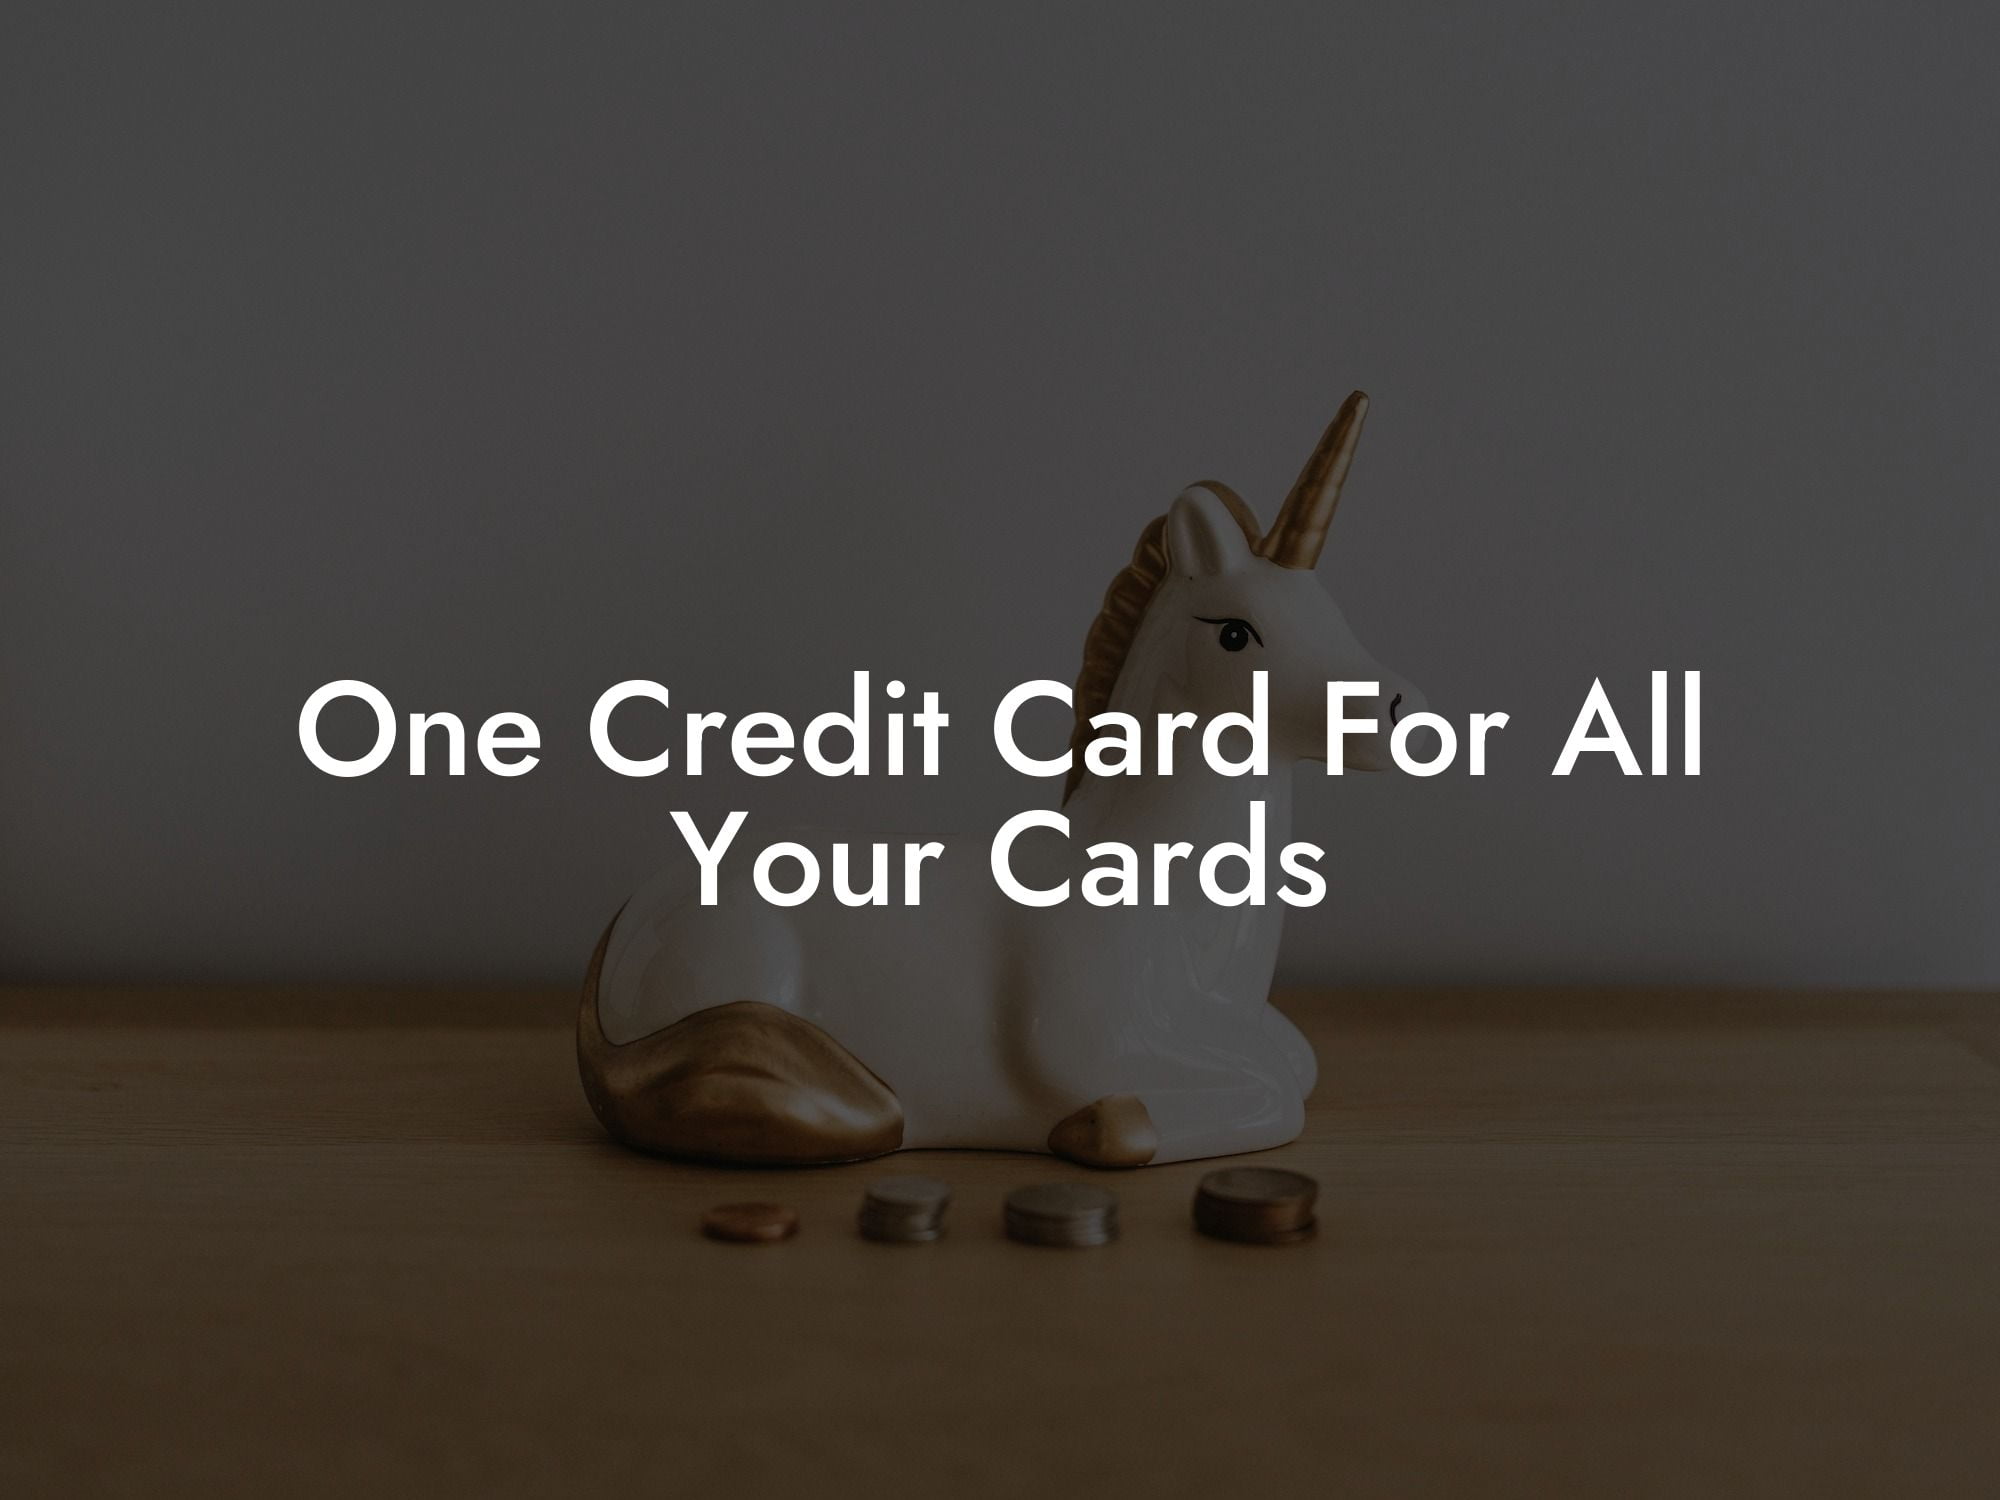 One Credit Card For All Your Cards